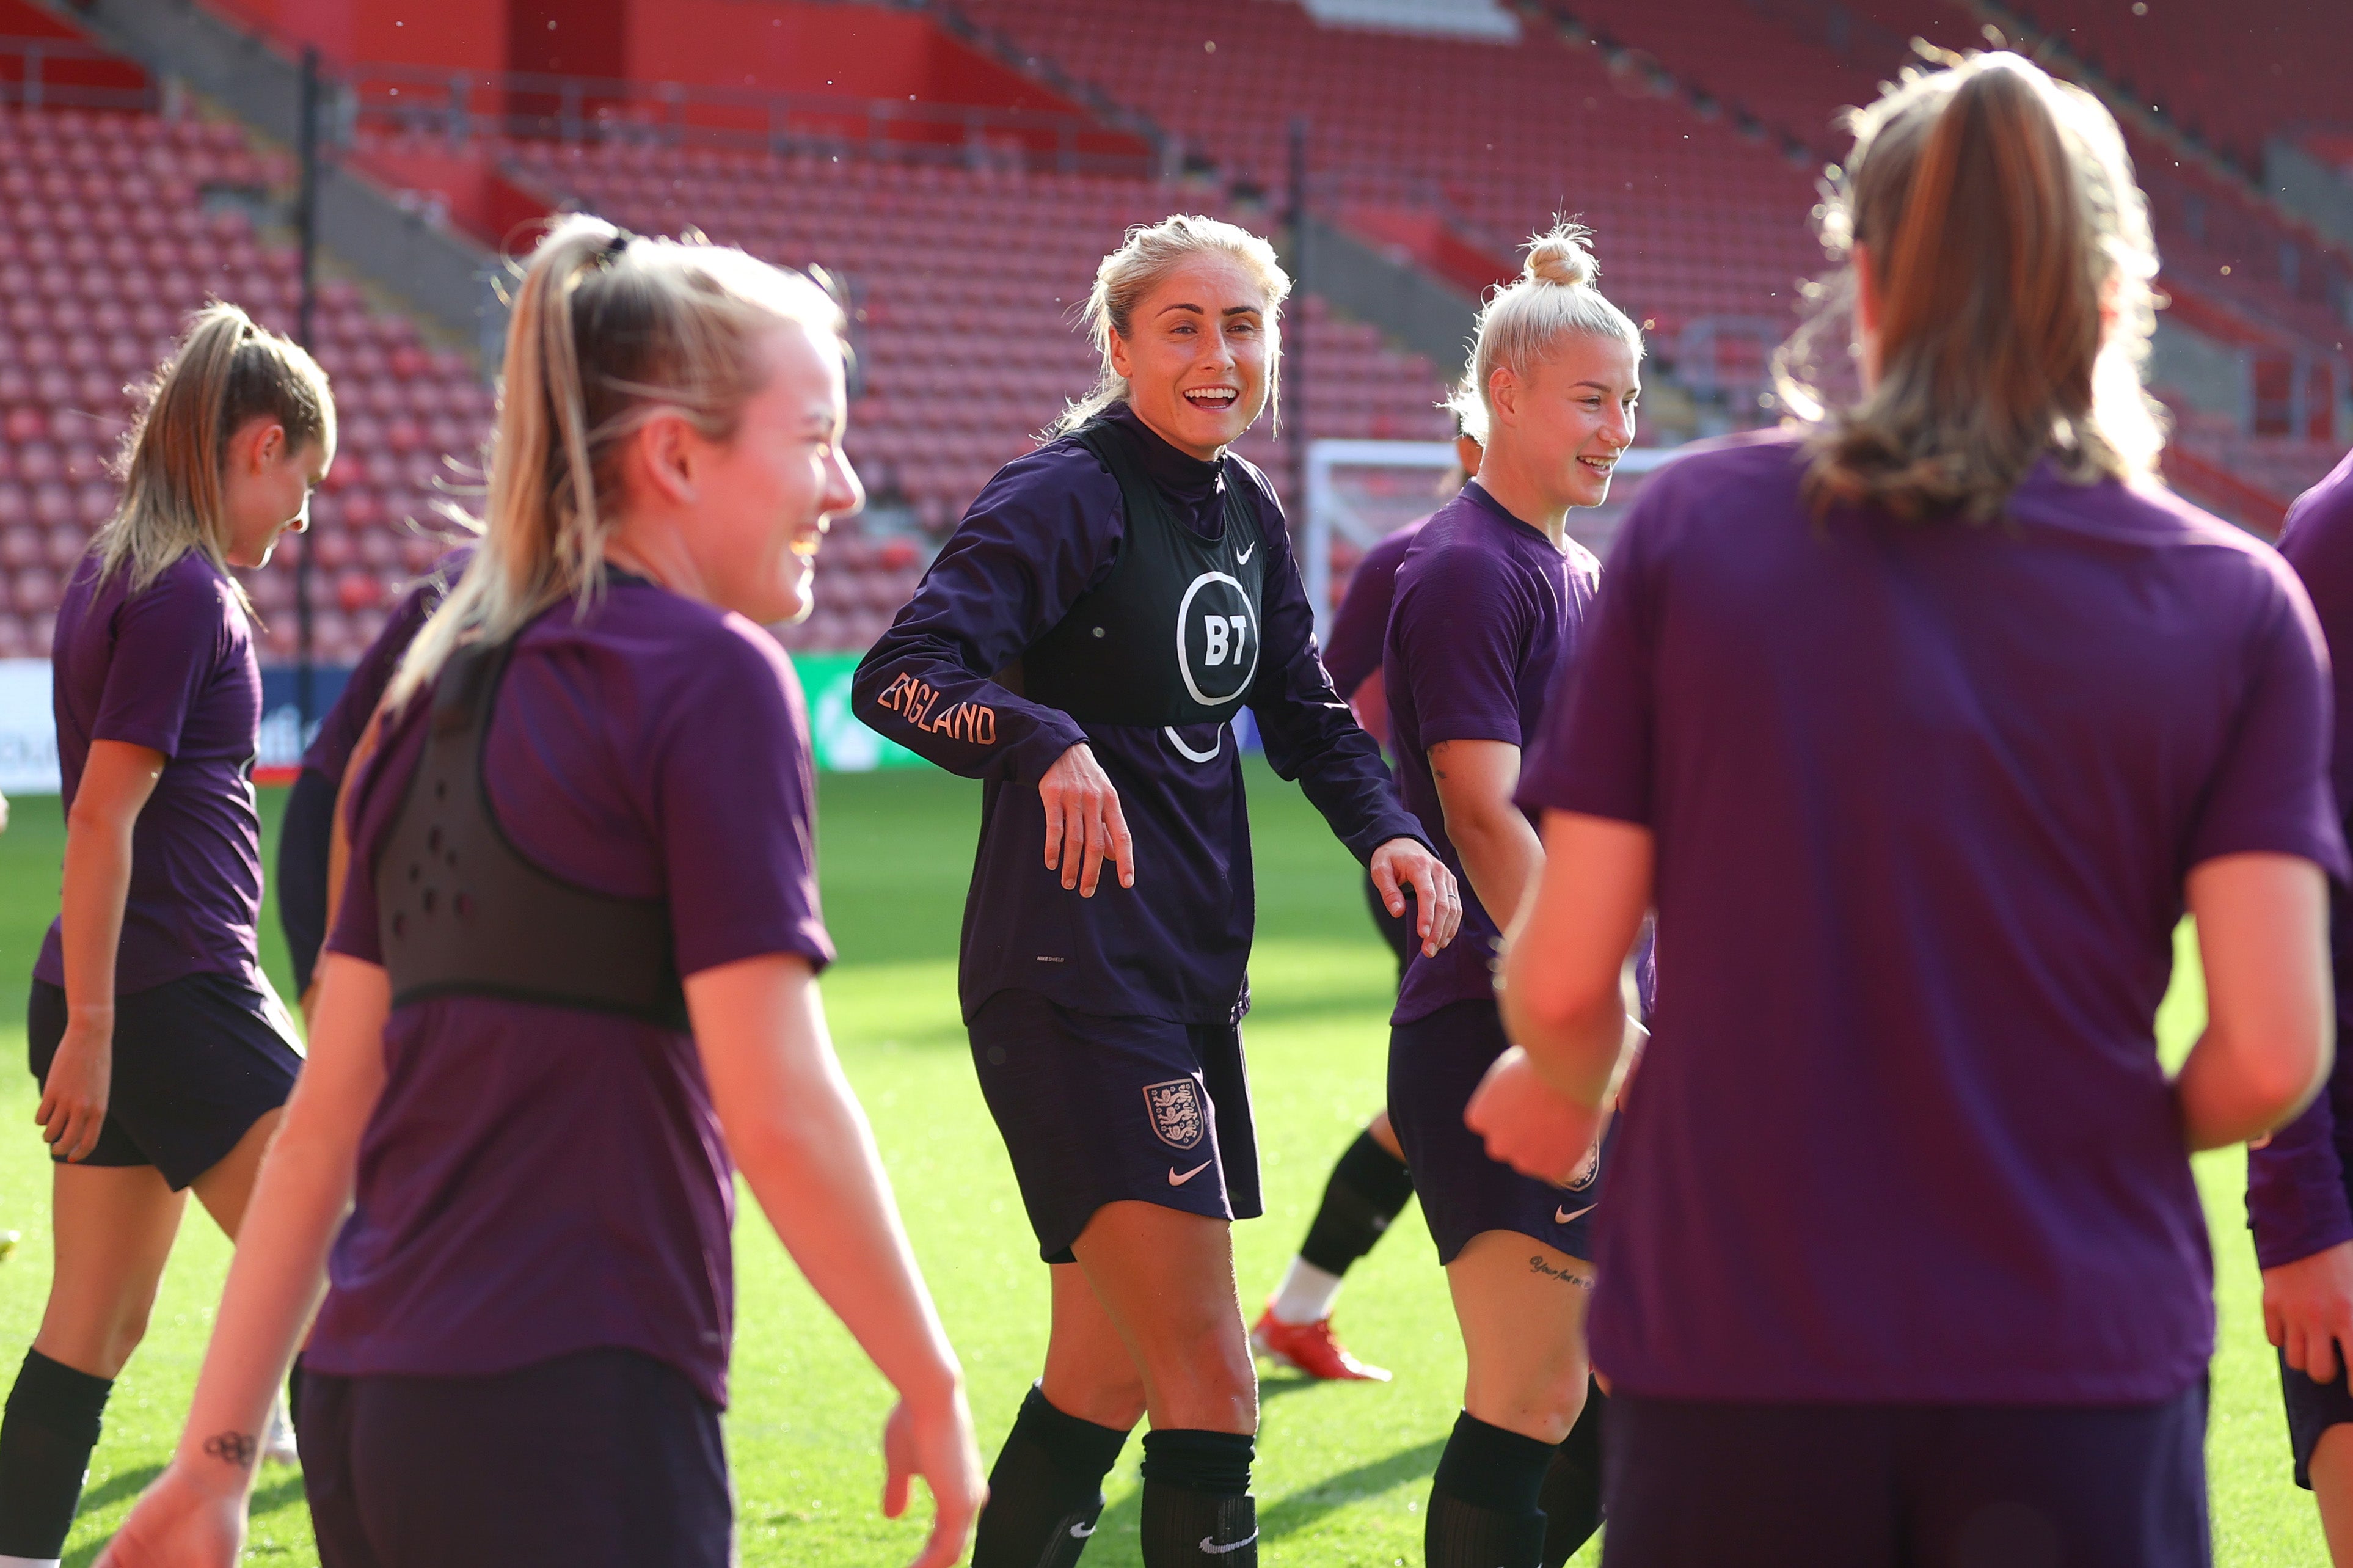 Steph Houghton won’t lead the England side this evening